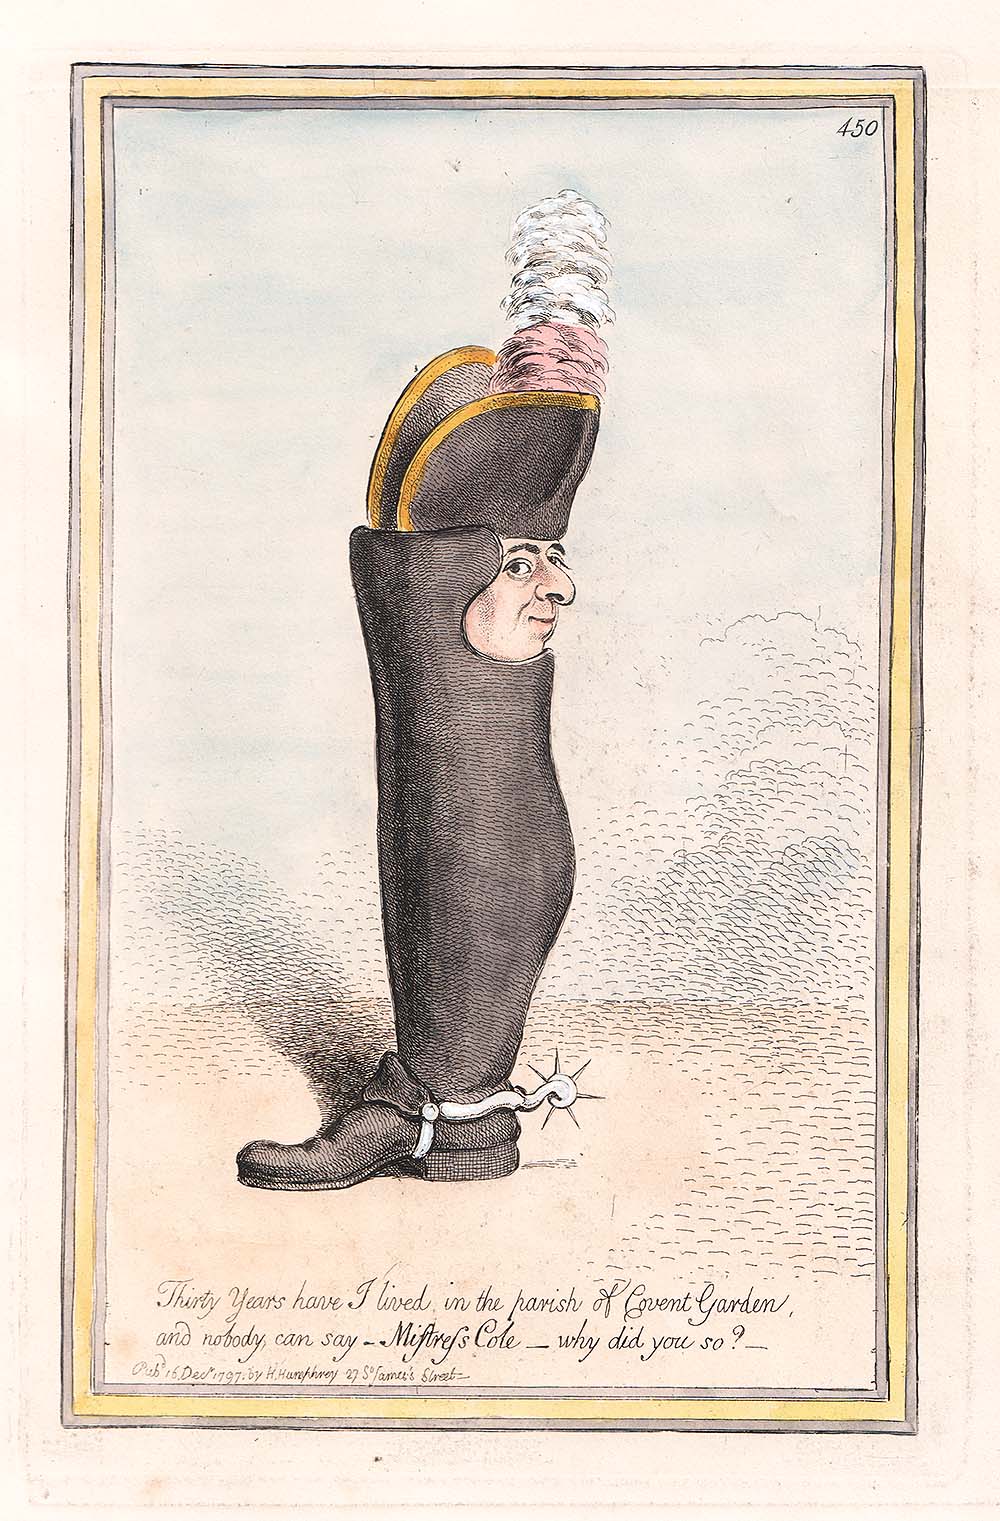 Gillray - Thirty years have I lived in the parish of Covent Garden and nobody can say-Mistress Cole-Why did you so? 